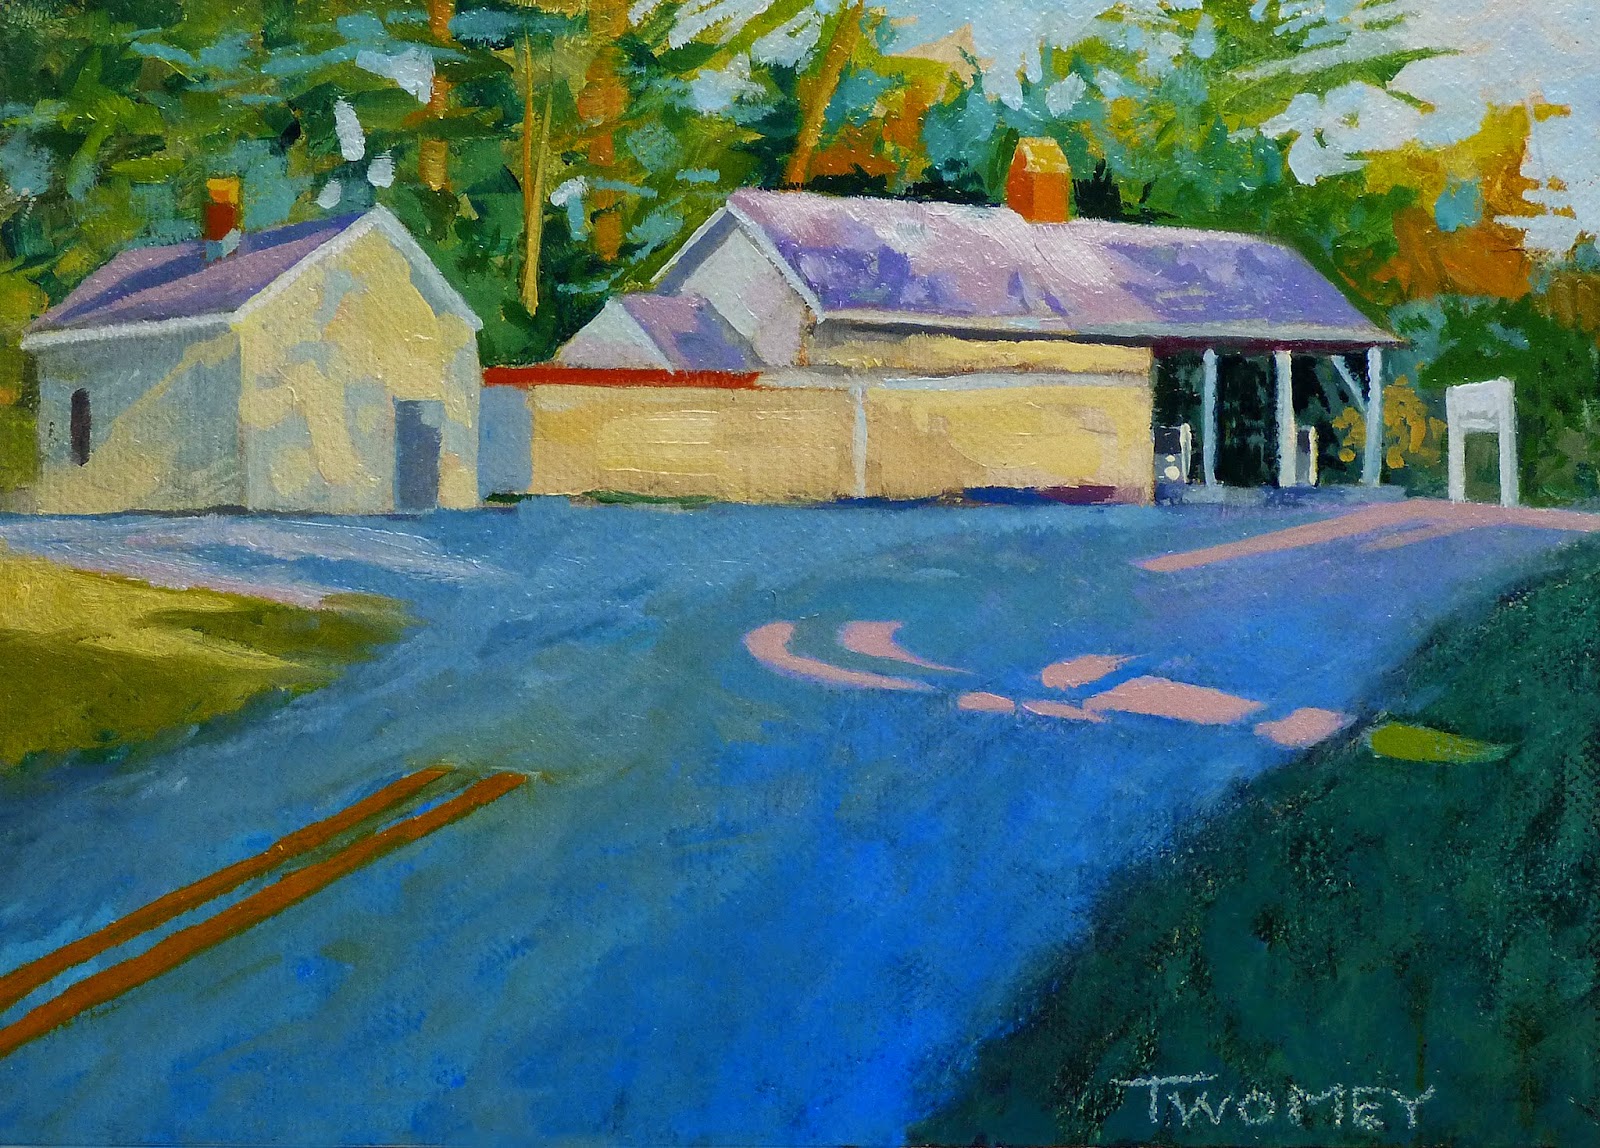  Virginia Country Store by Twomey